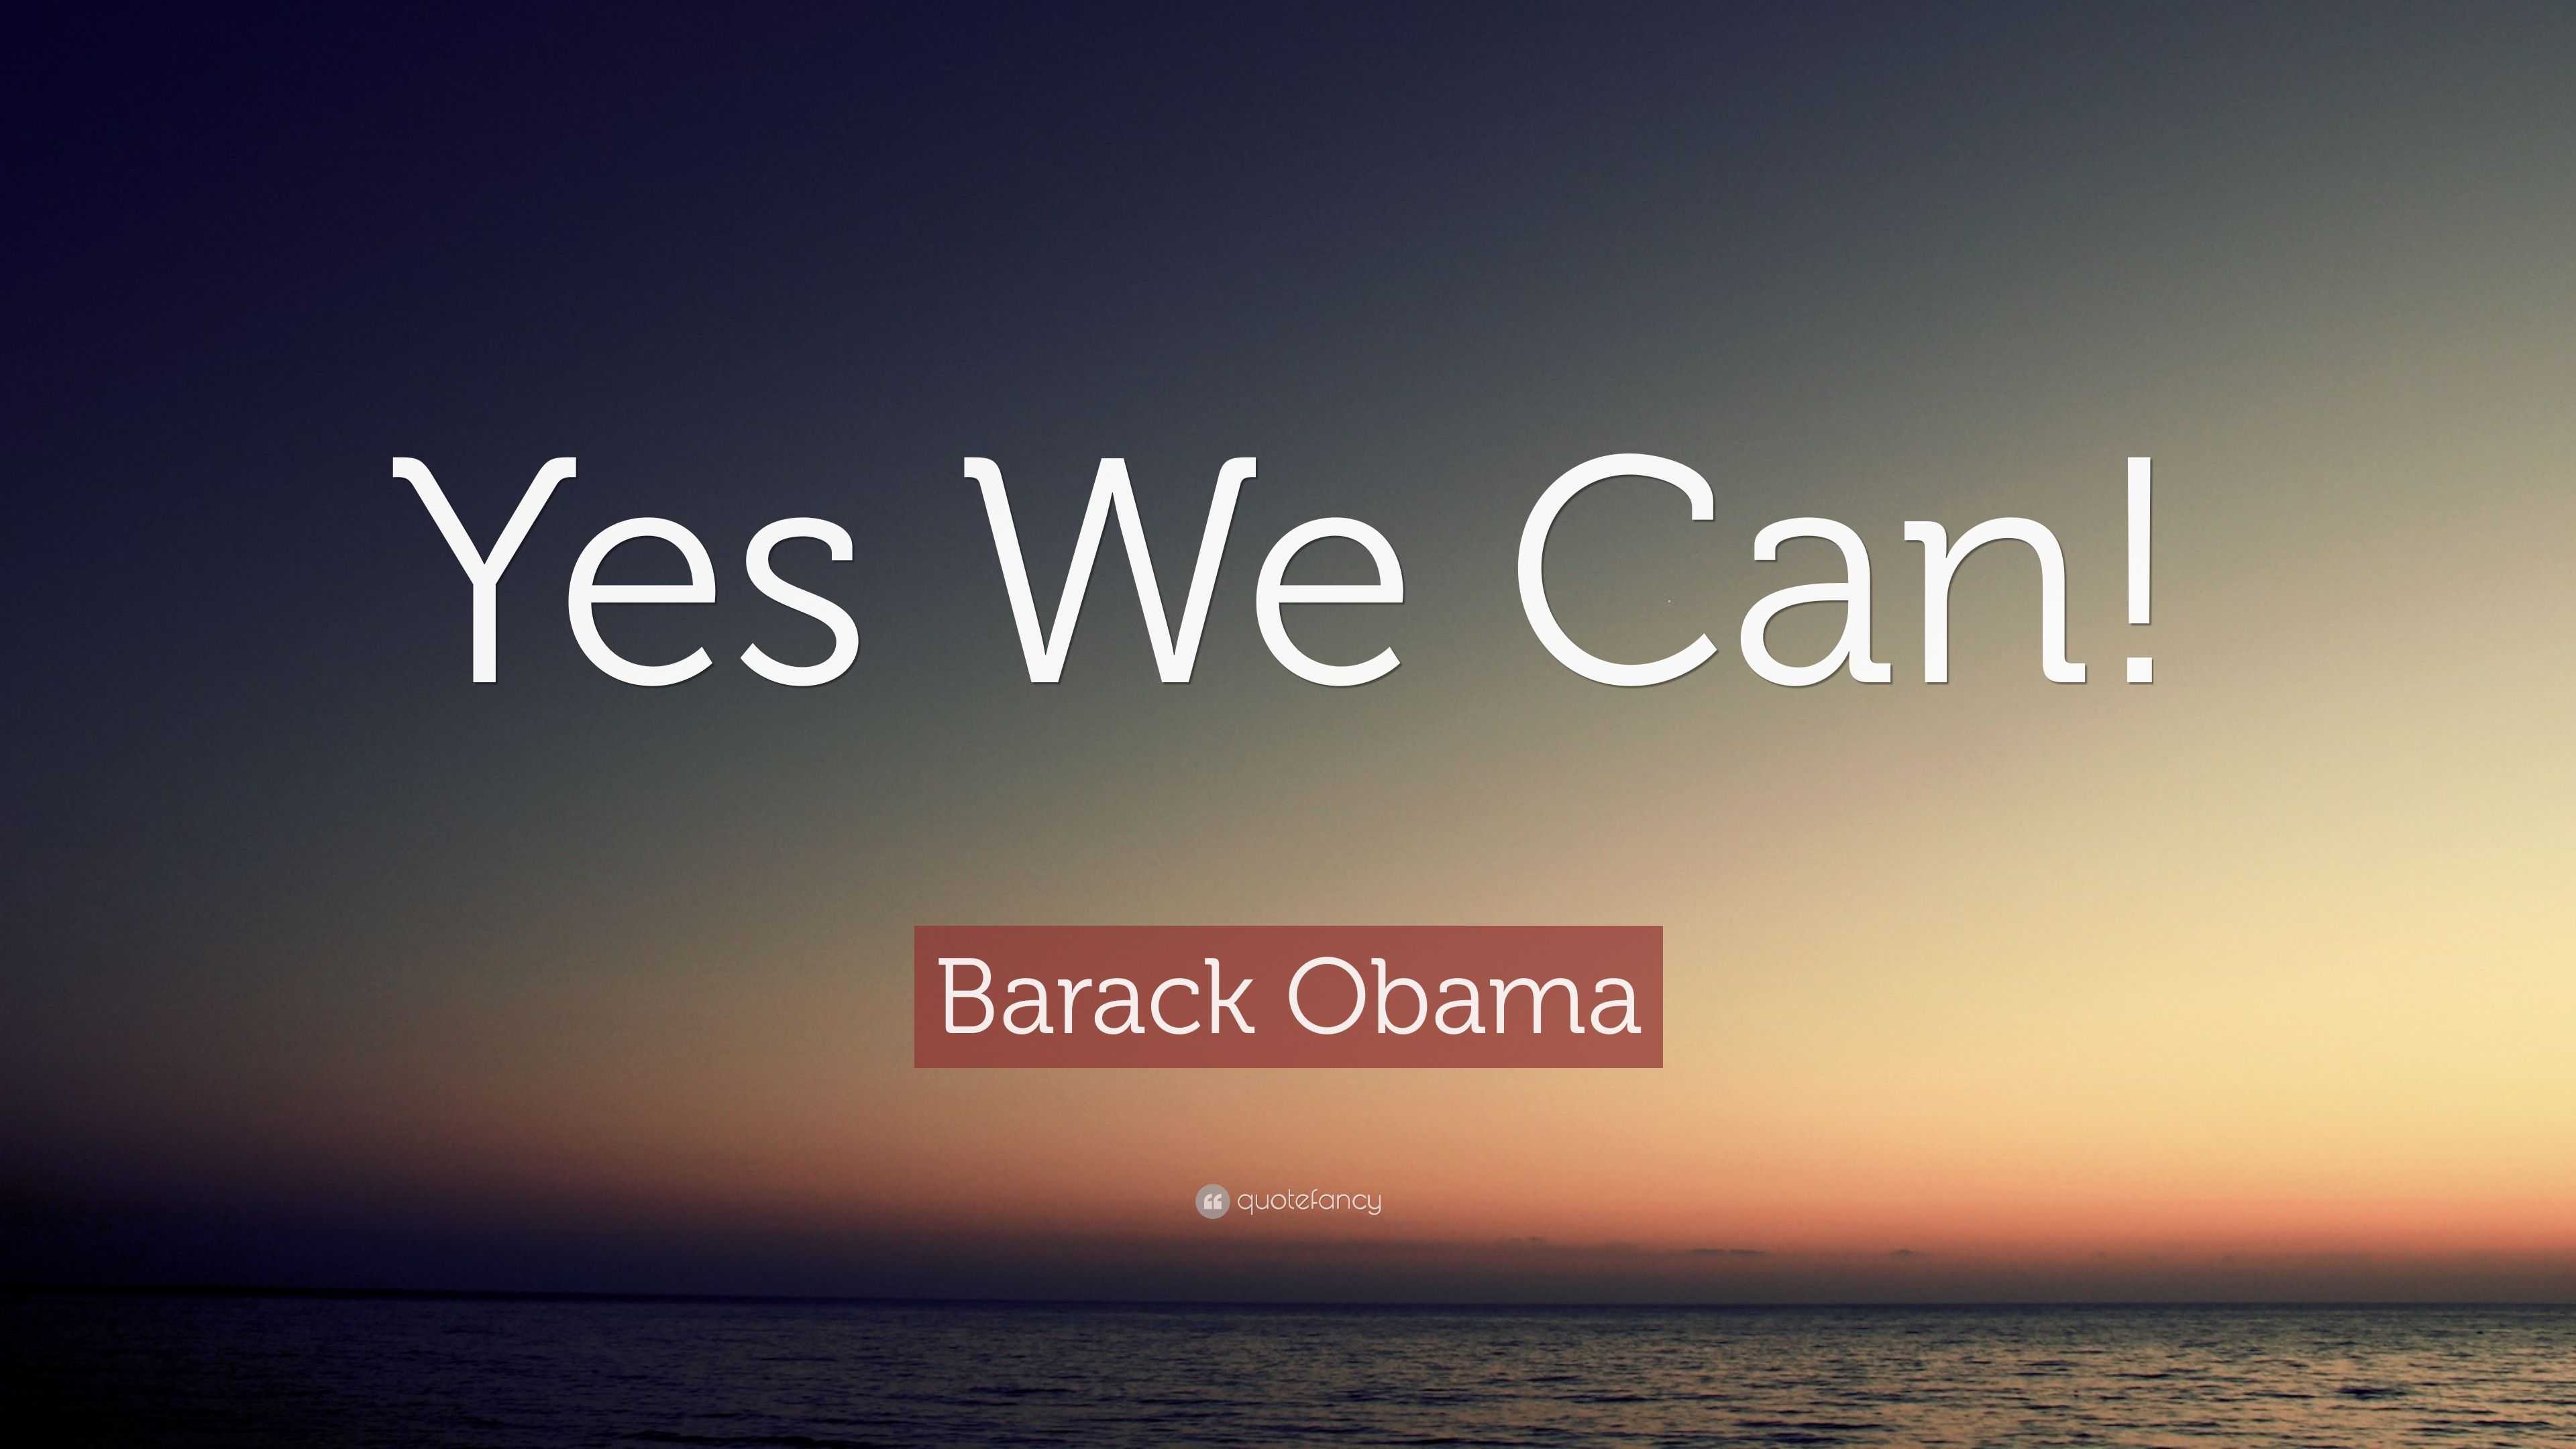 Barack Obama Quote: "Yes We Can!" (19 wallpapers) - Quotefancy